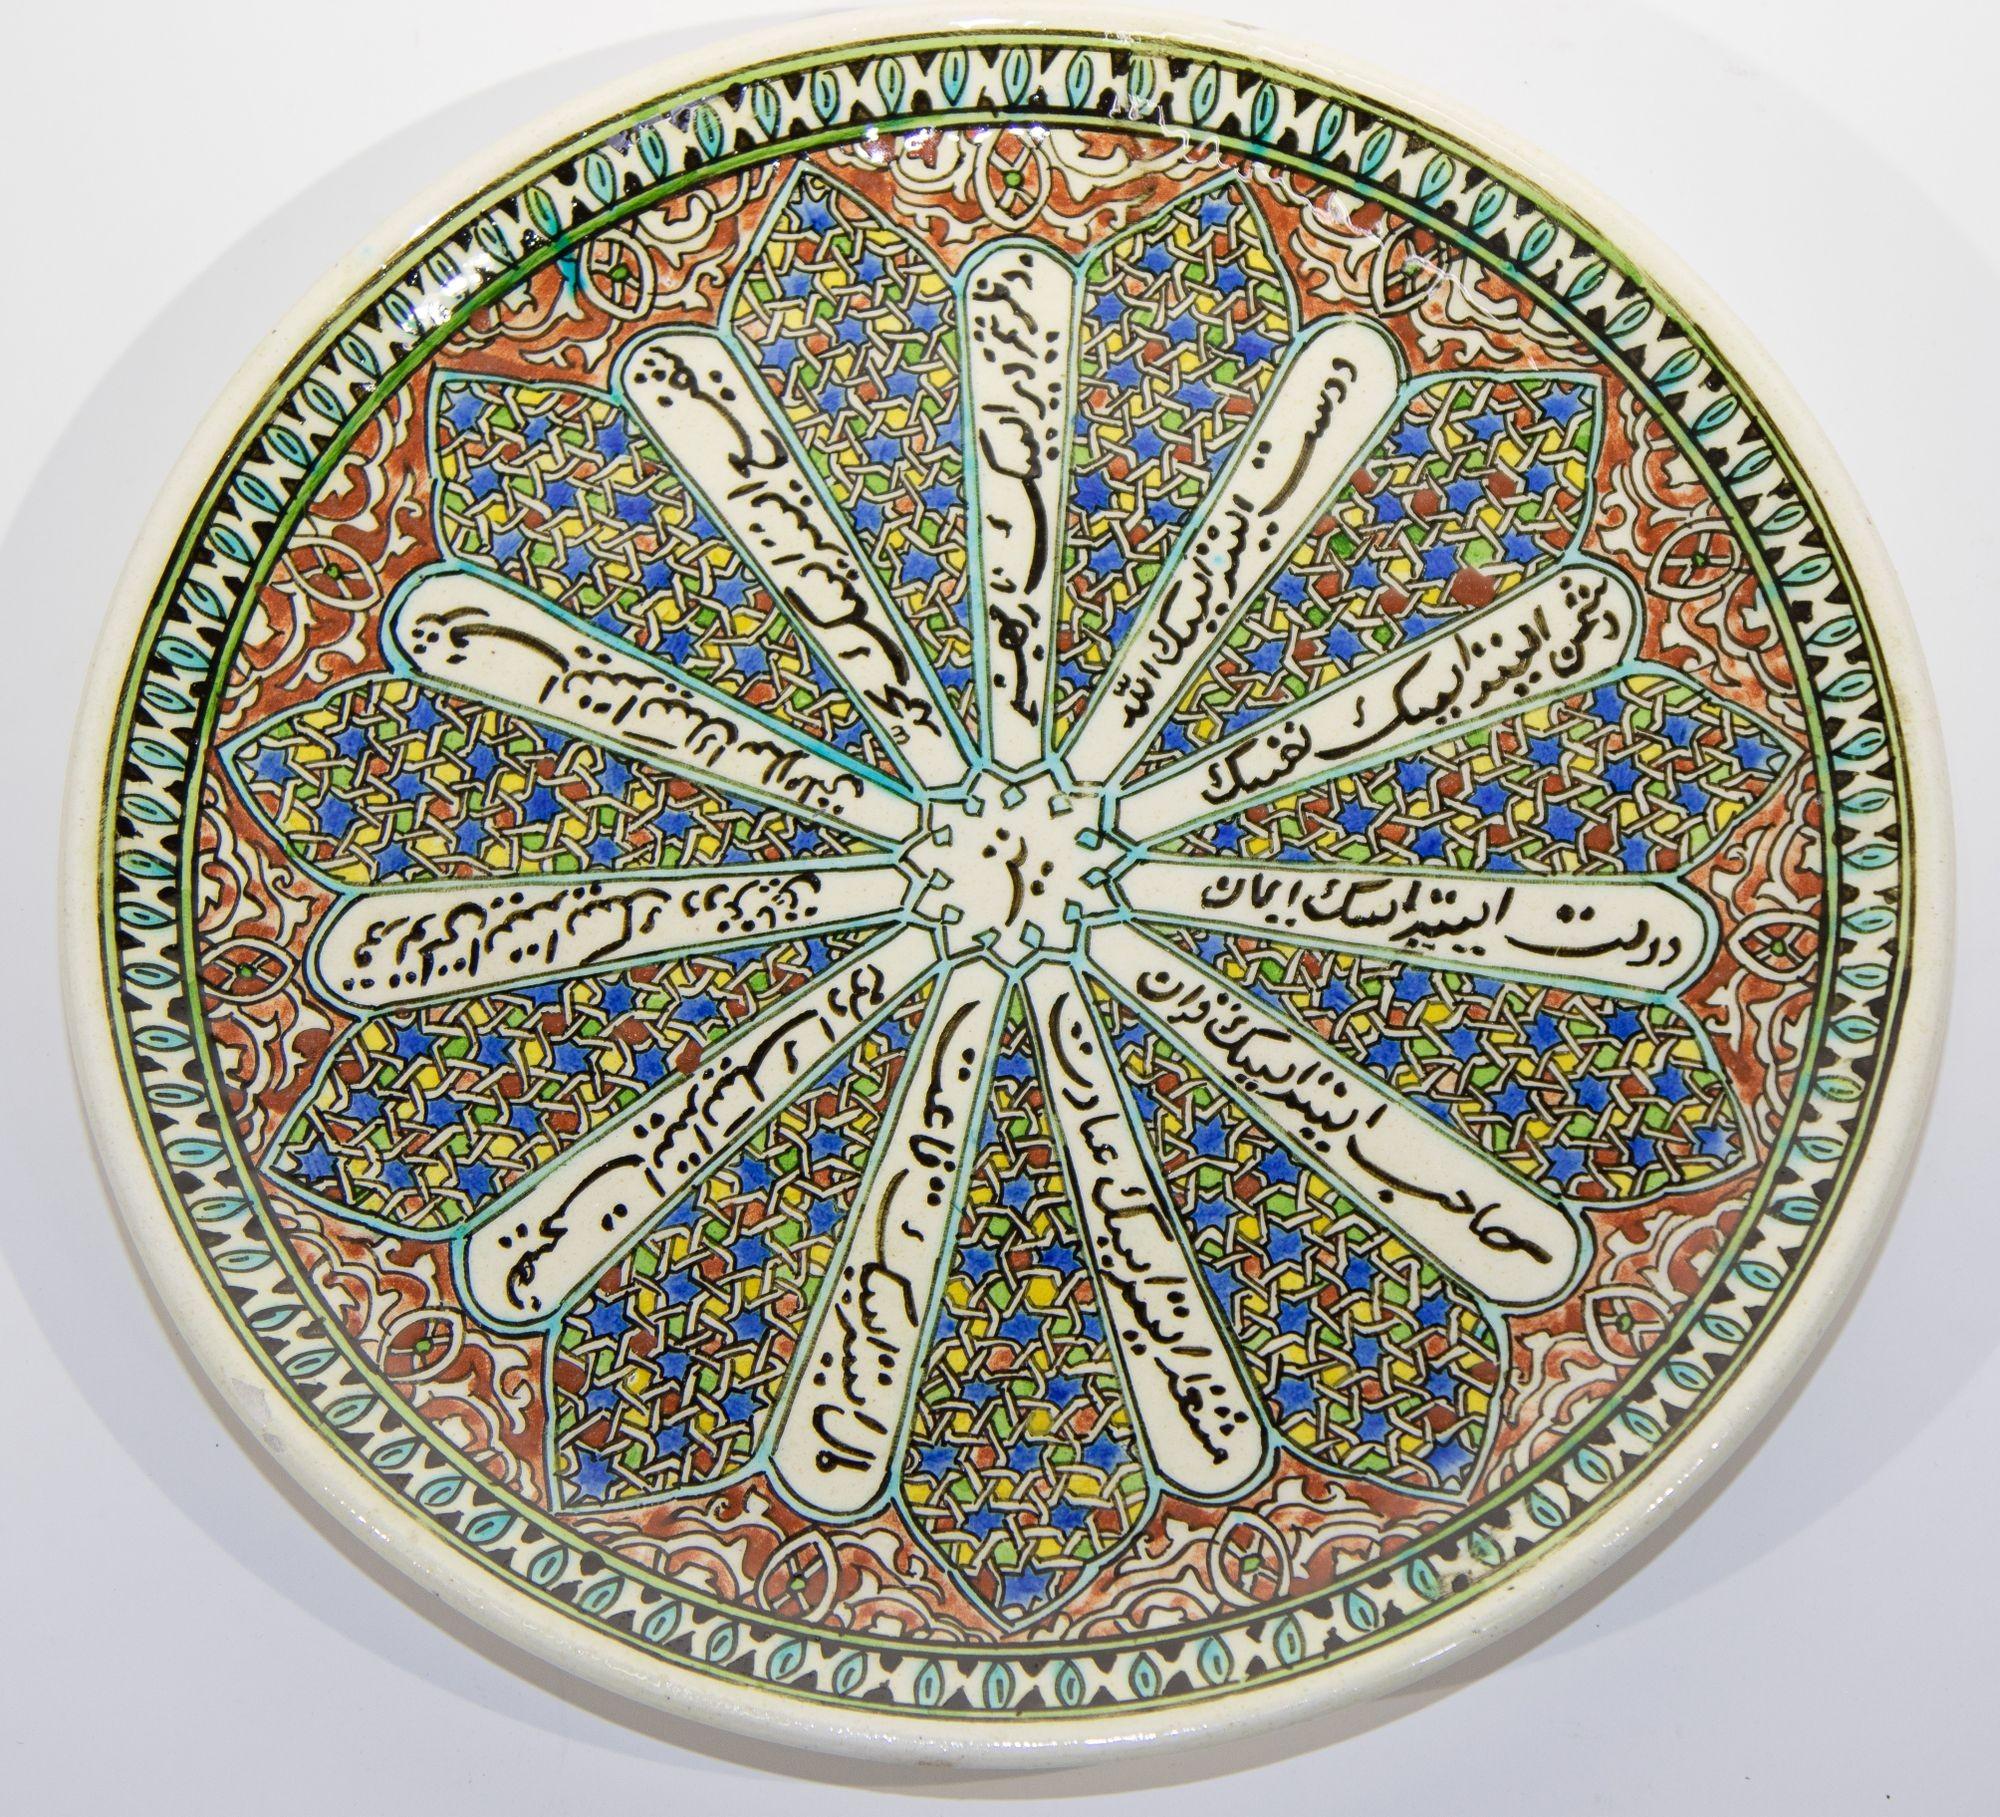 Vintage Turkish Polychrome Hand Painted Ceramic Kutahya Platter. Circa 1950's.
Hand painted and handcrafted Turkish Kutahya ceramic wall decorative plate with polychrome Ottoman geometric design and Islamic calligraphy writing.
This is an